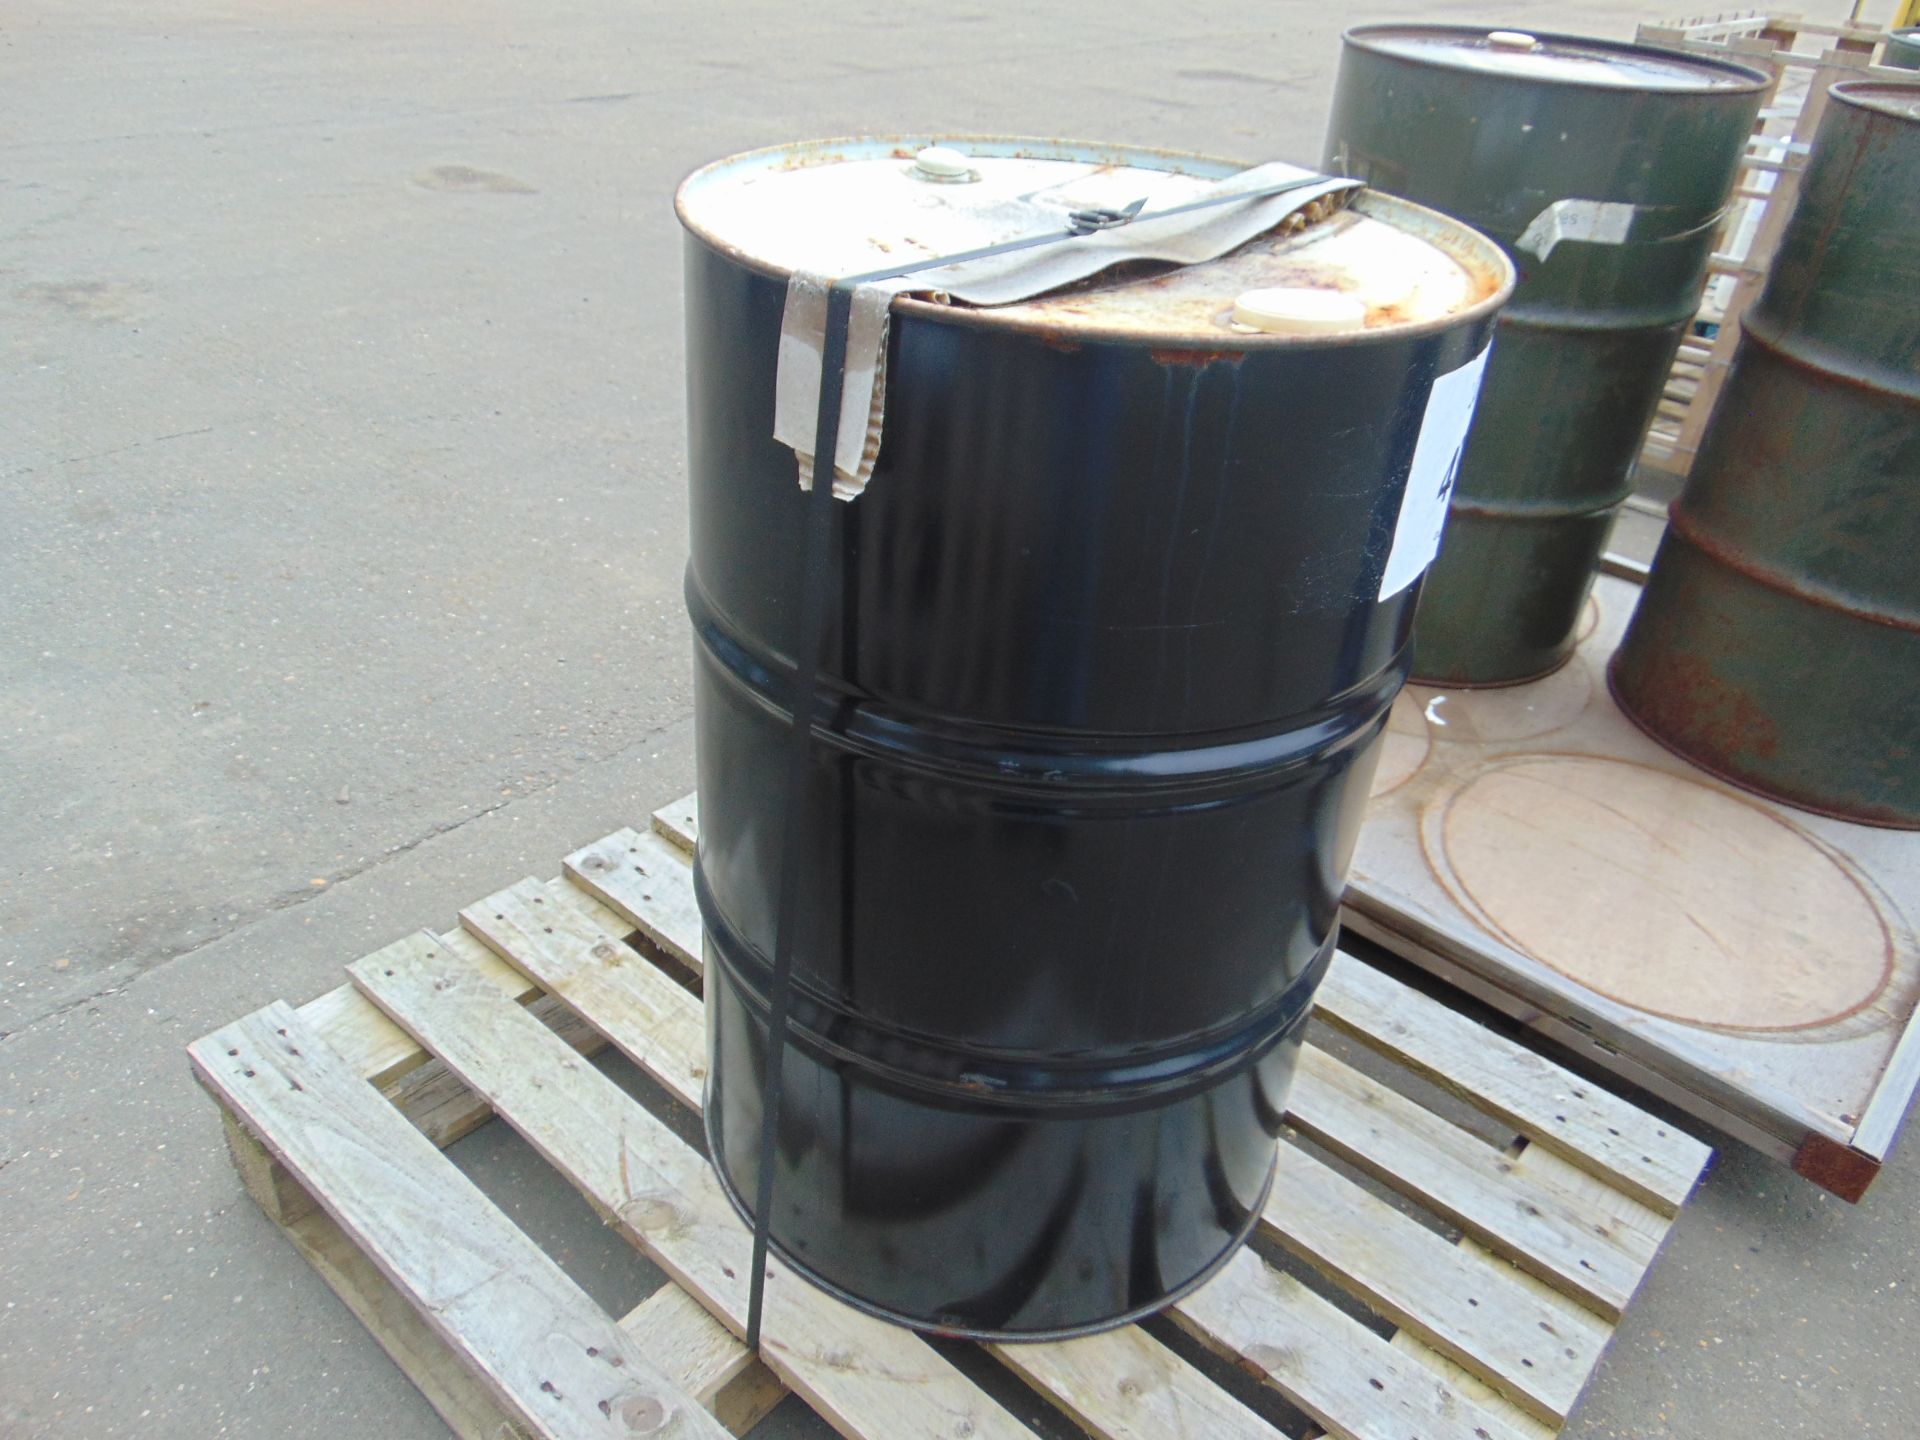 1X 205L BARREL OF OX-125 EASTMAN HALO 157 HIGH QUALITY ESTER BASED AVIATION TURBINE/HELICOPTER OIL - Image 2 of 3